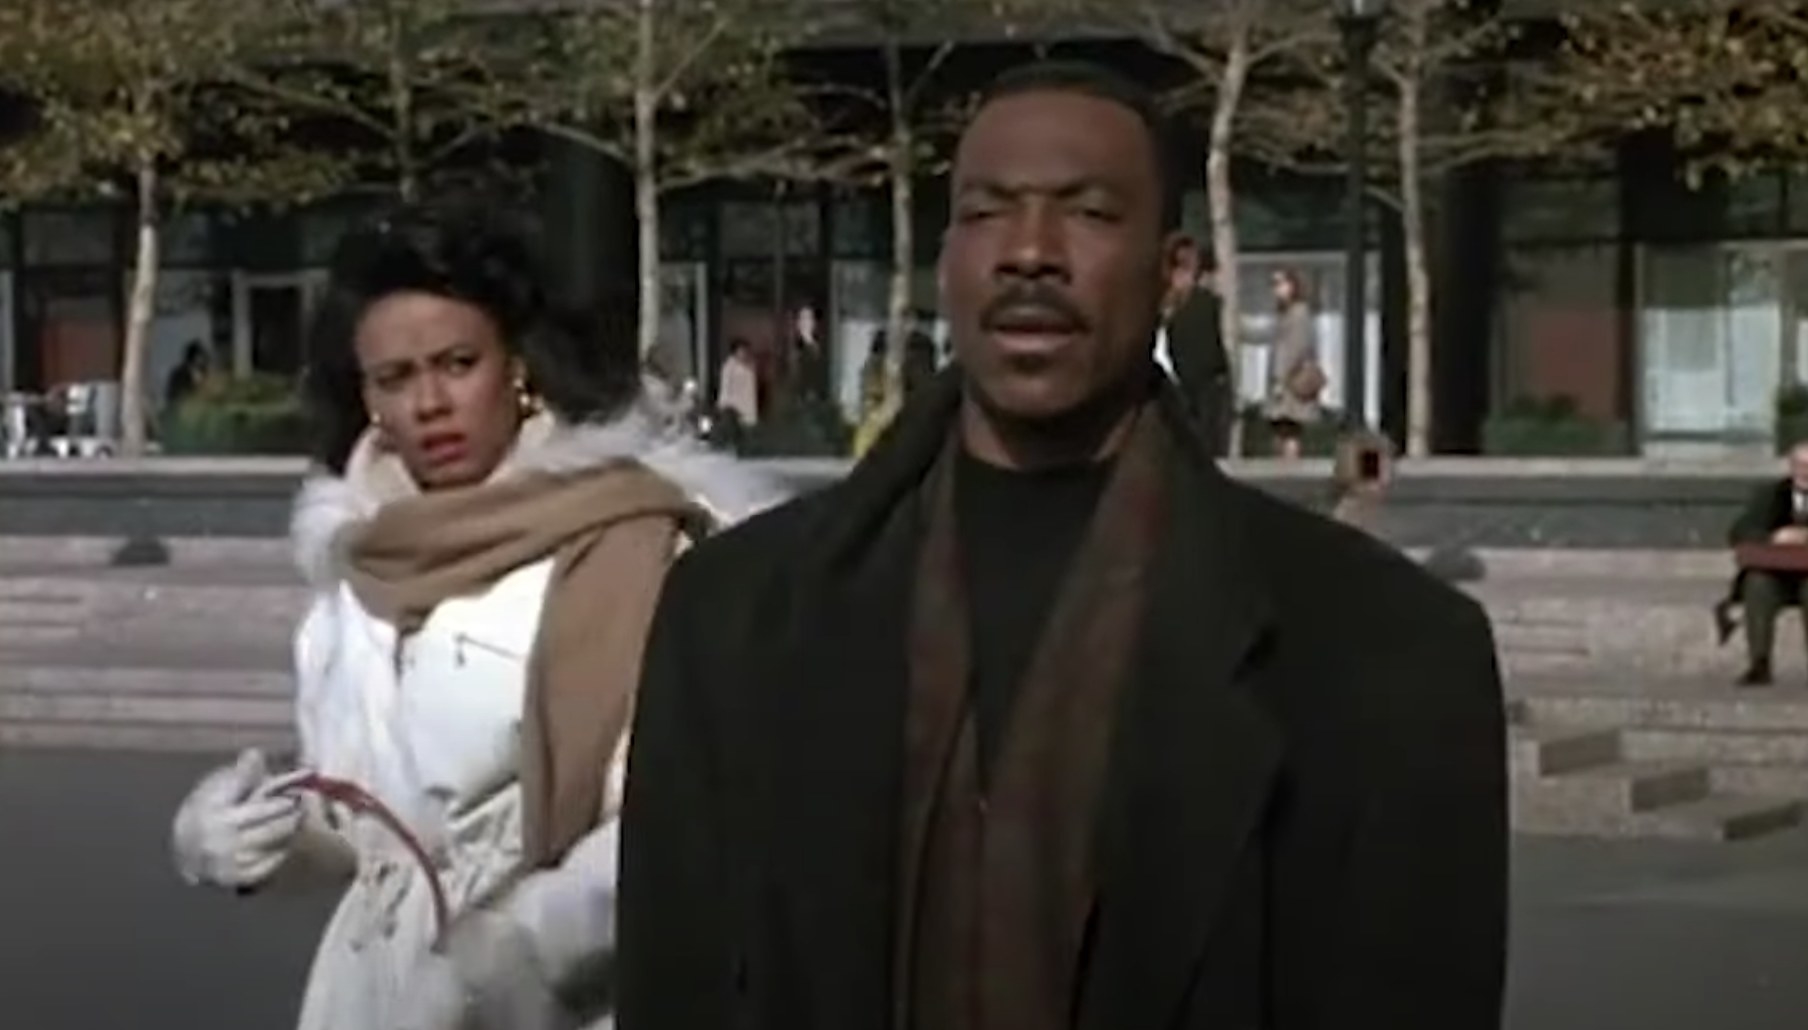 Actress Robin Givens stands behind actor Eddie Murphy while looking very confused. They are both wearing coats and are walking outside.